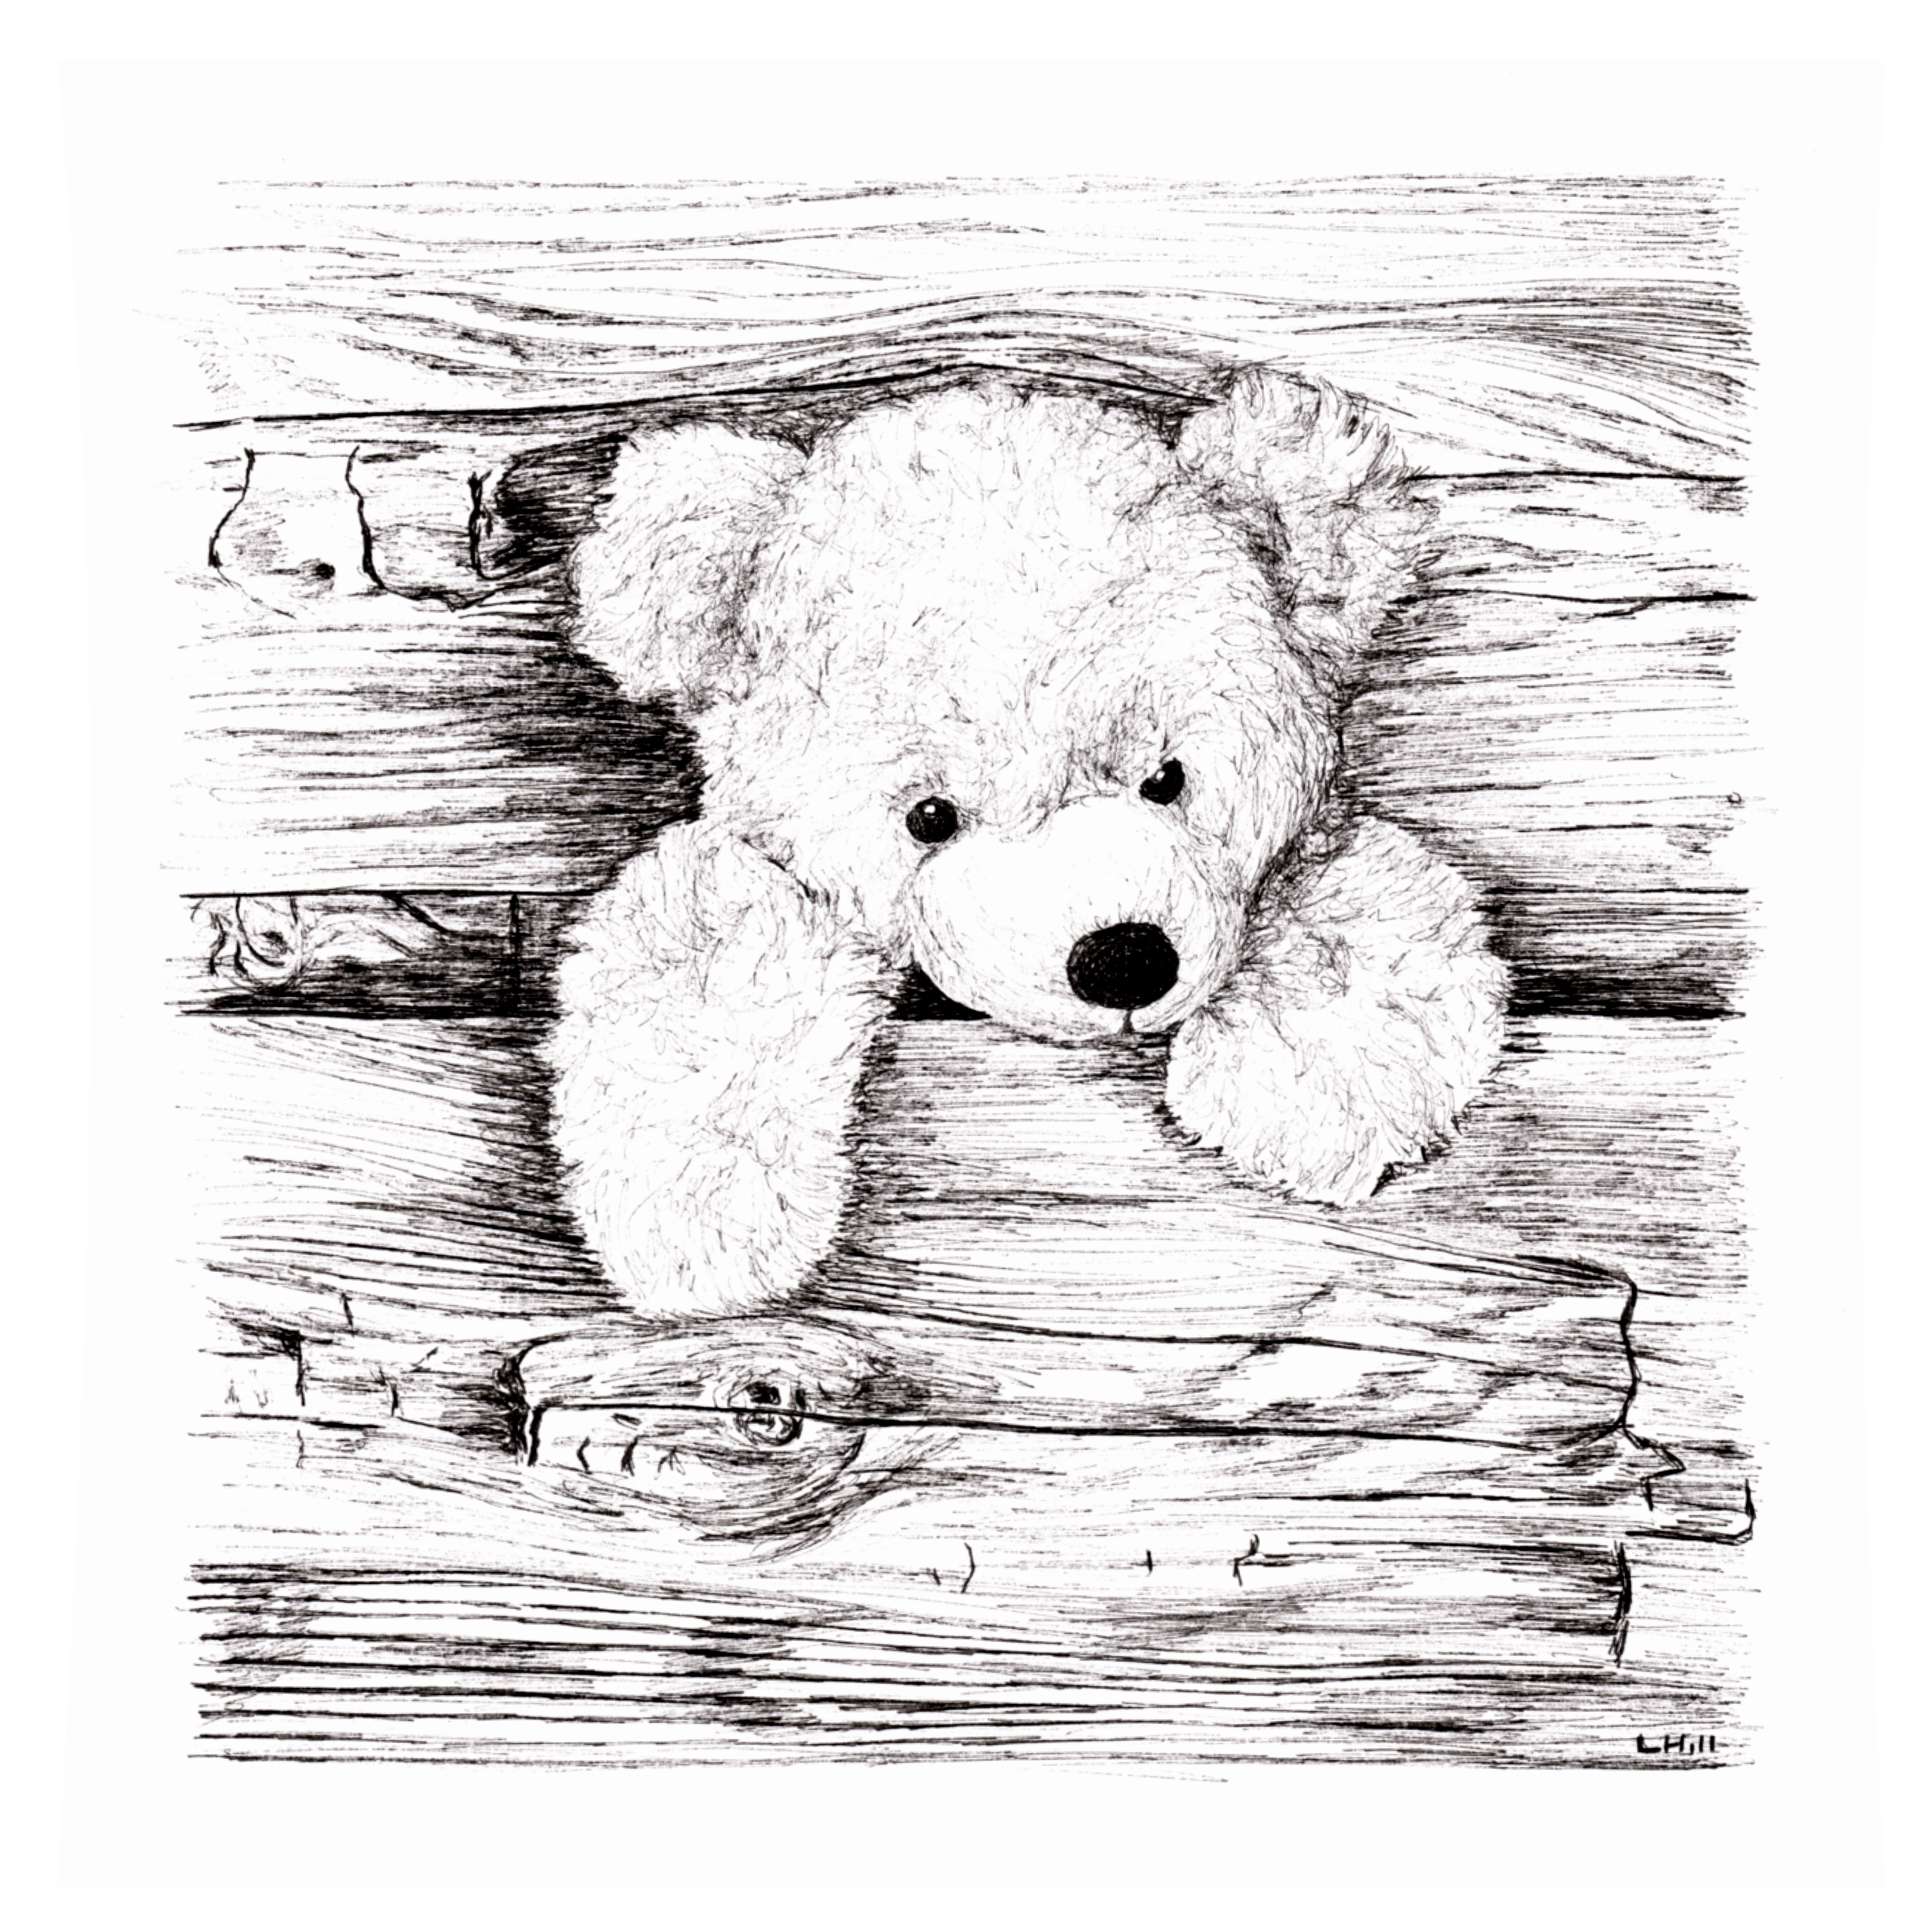 Teddy pen and ink illustration by Louisa Hill